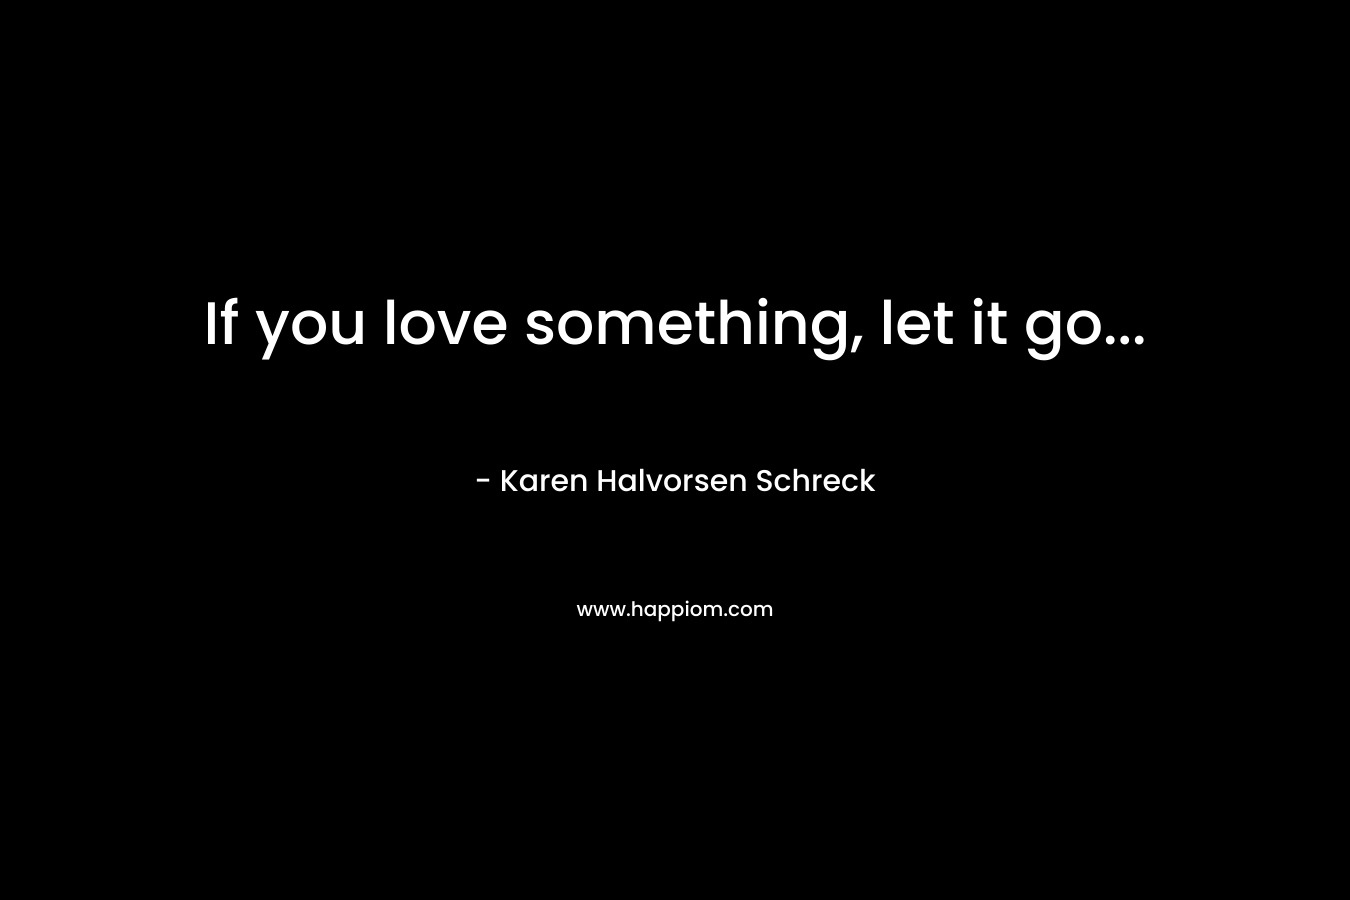 If you love something, let it go...